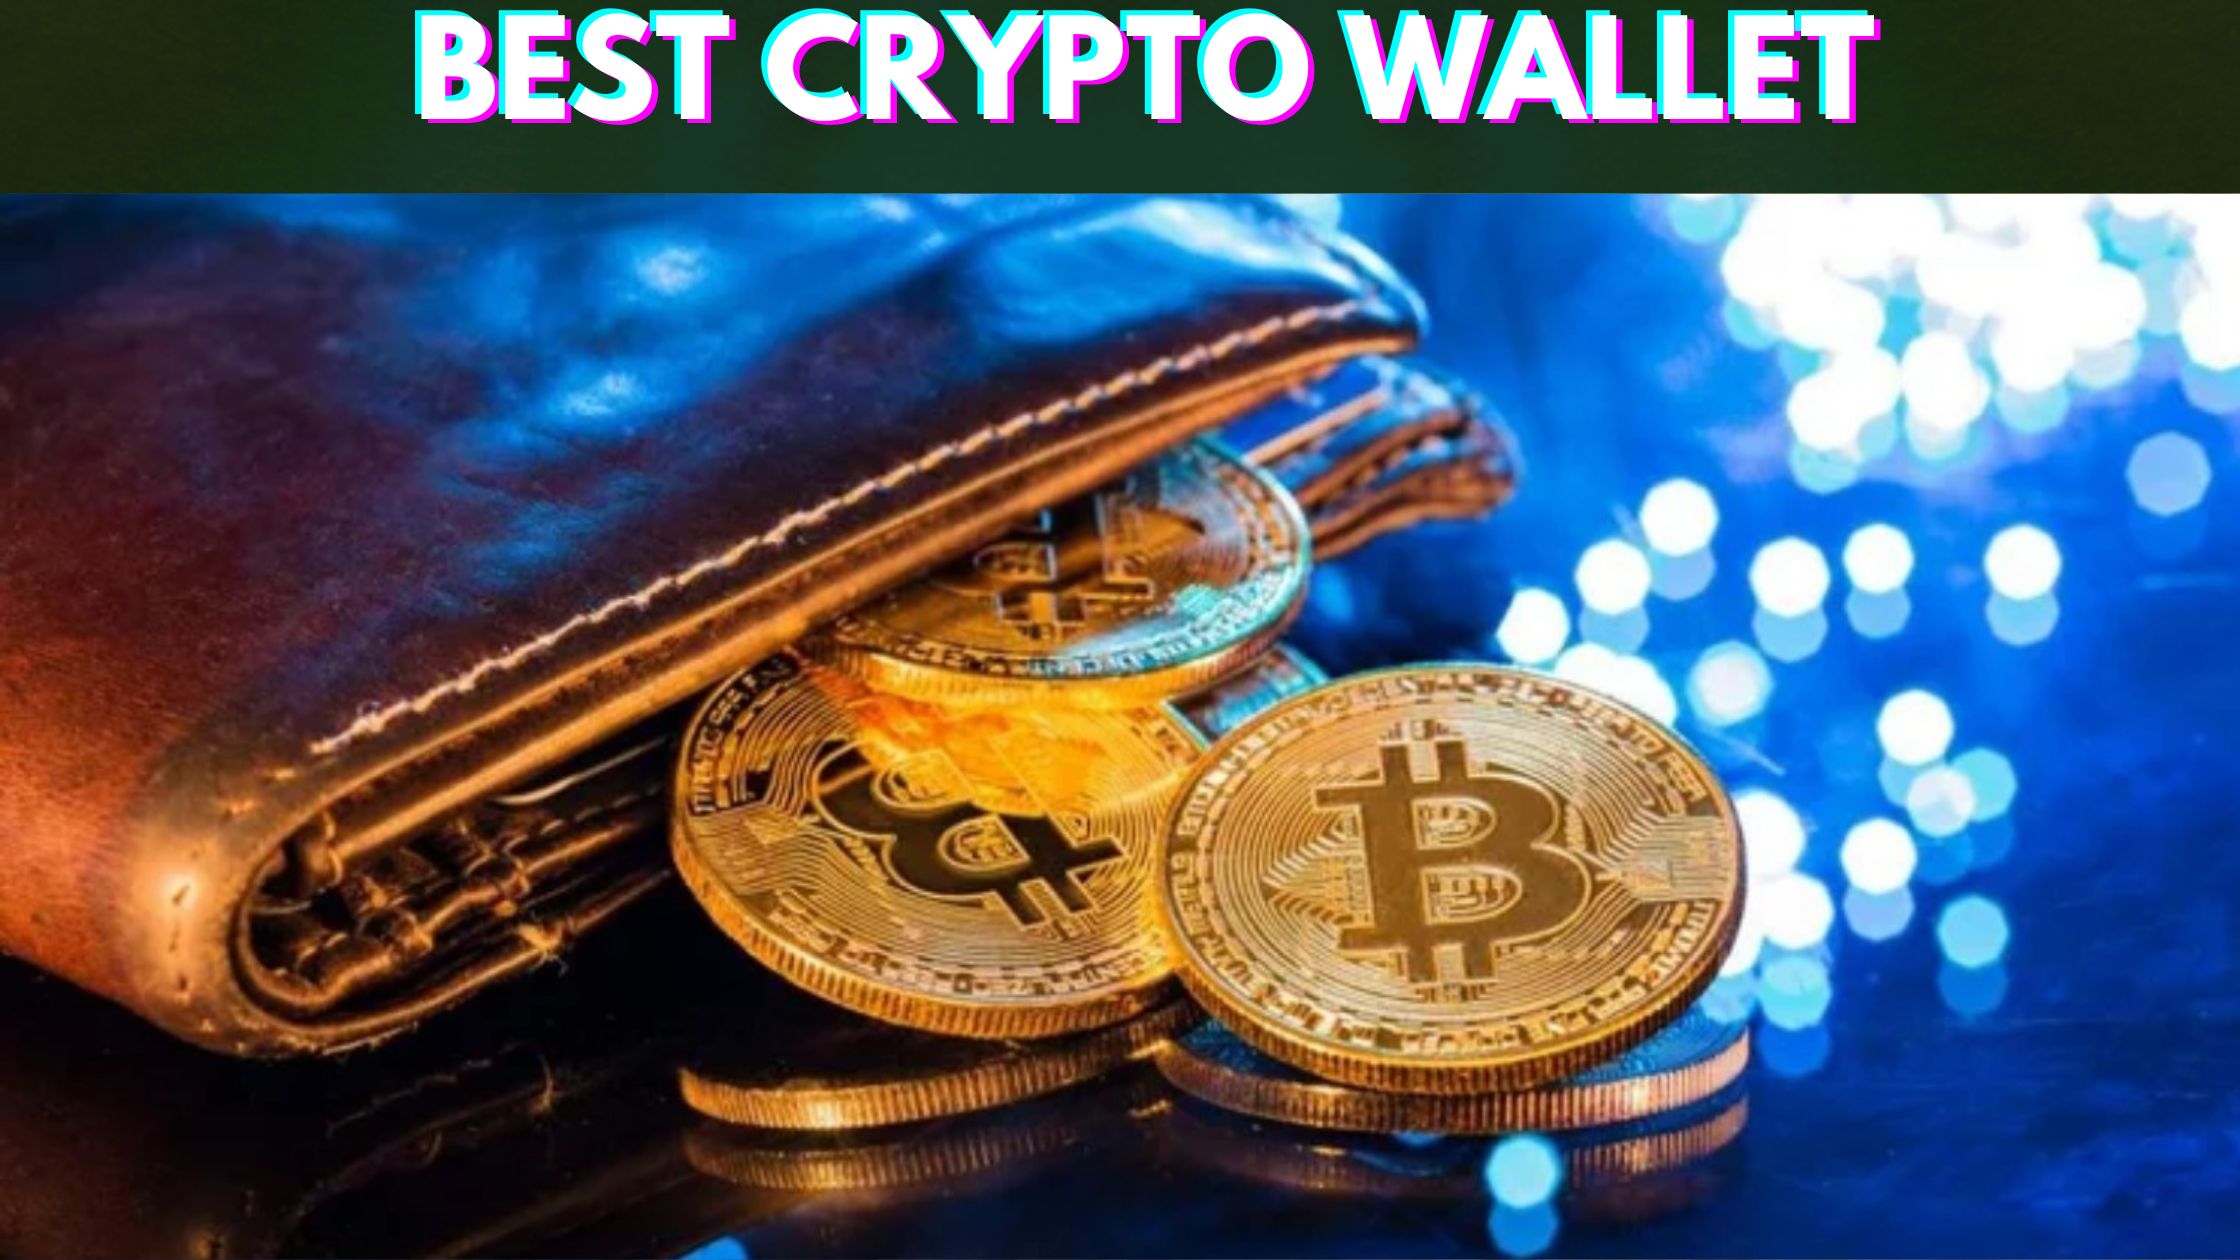 Best Crypto Wallet